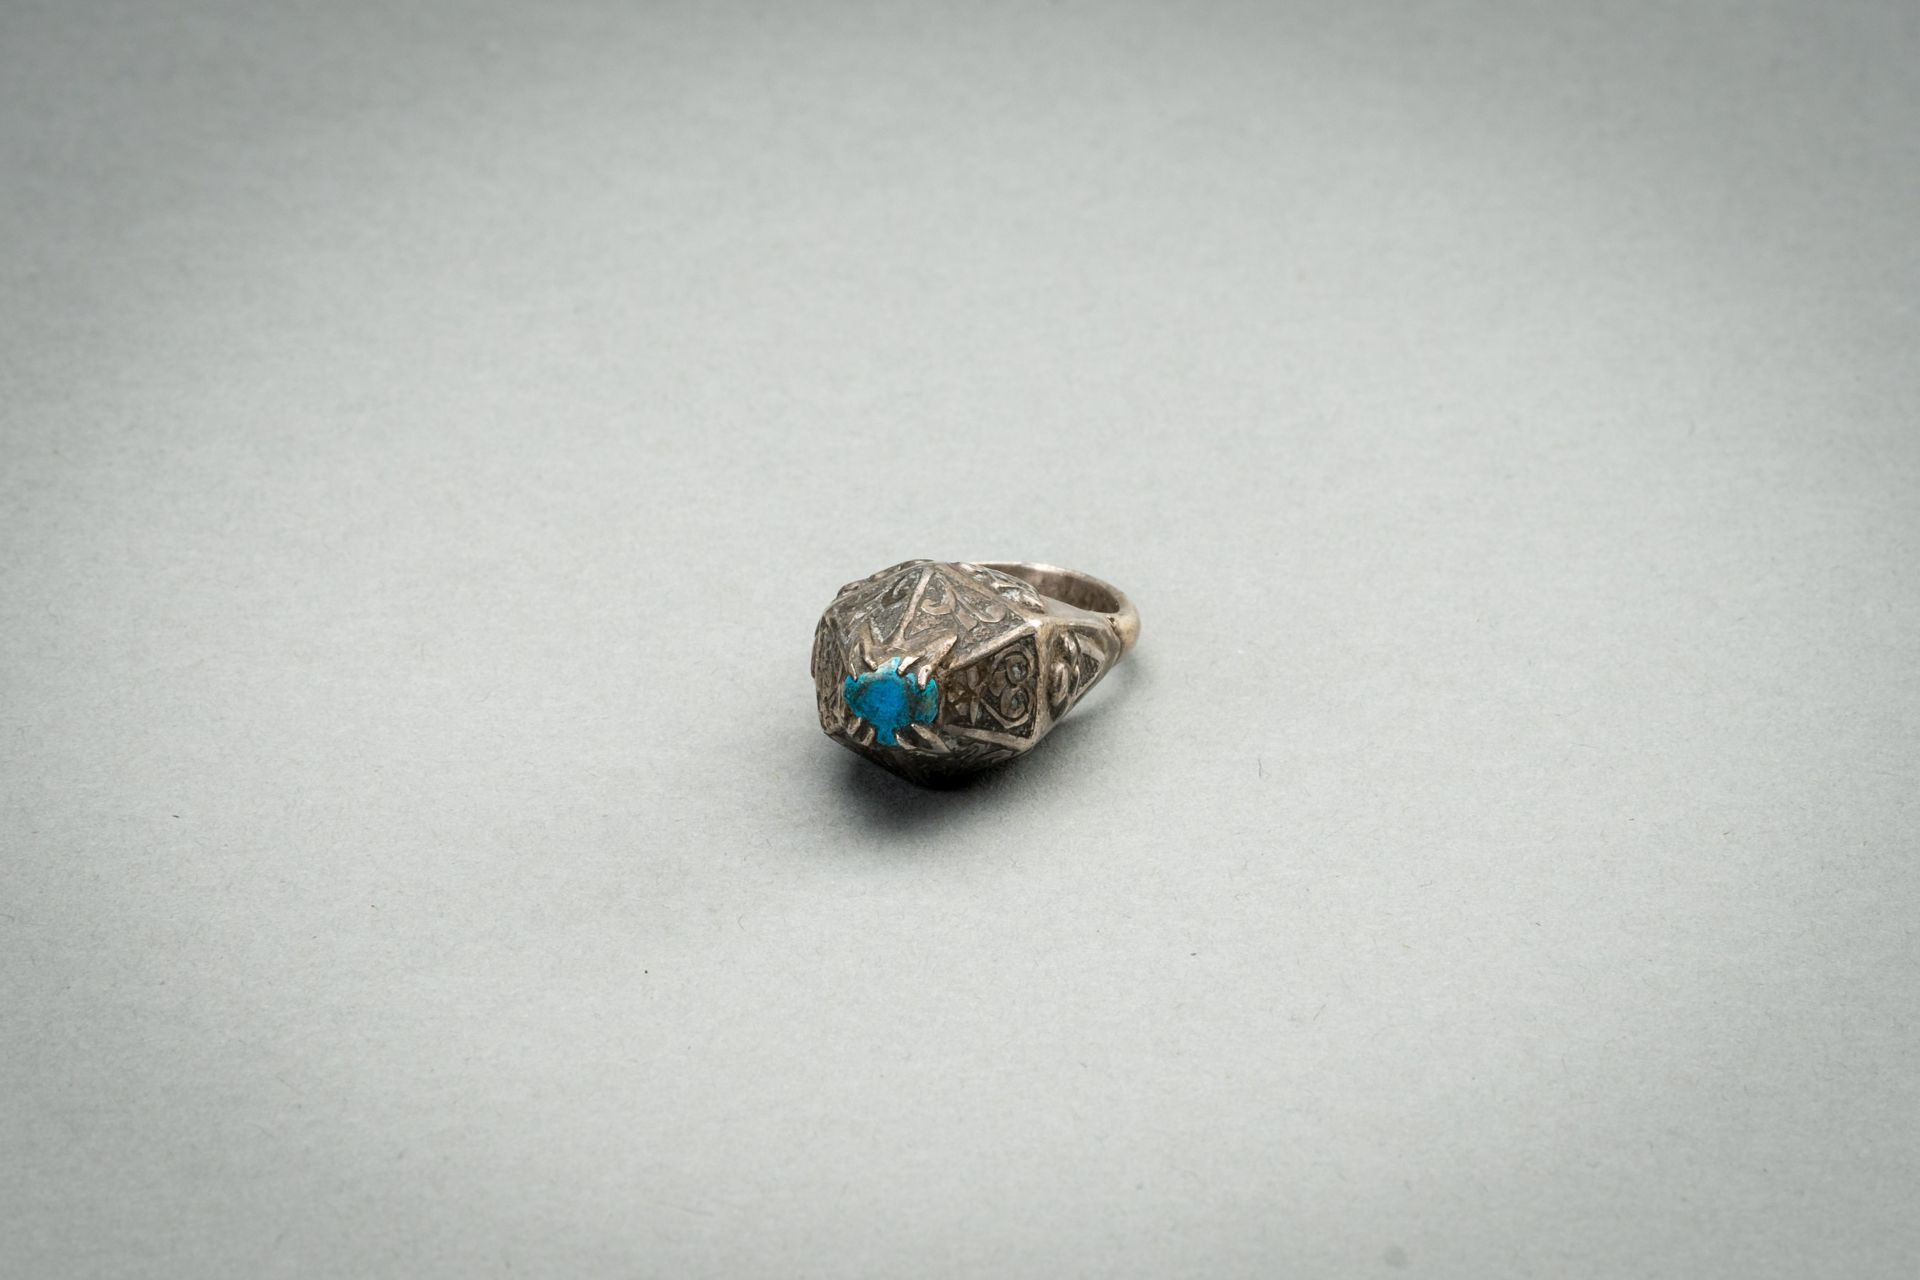 A TURQUOISE-MATRIX-SET SILVER RING, 19TH CENTURY - Image 6 of 7